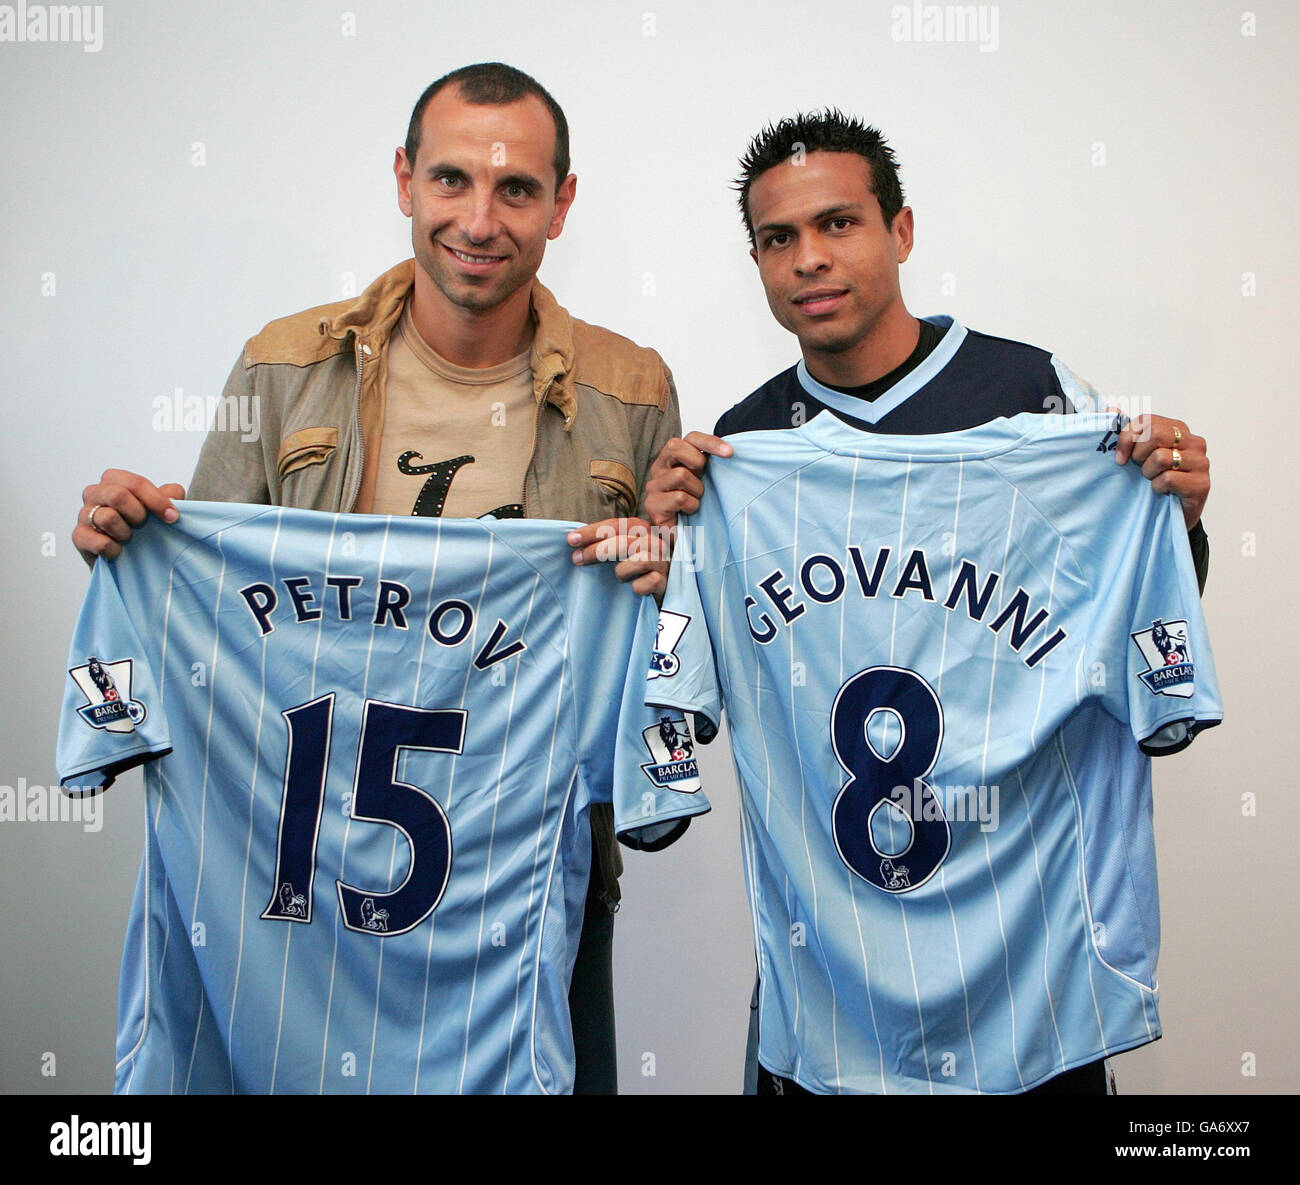 Manchester City's new signings Martin Petrov (left) and Geovanni at thier training ground in Carrington, Manchester. Stock Photo